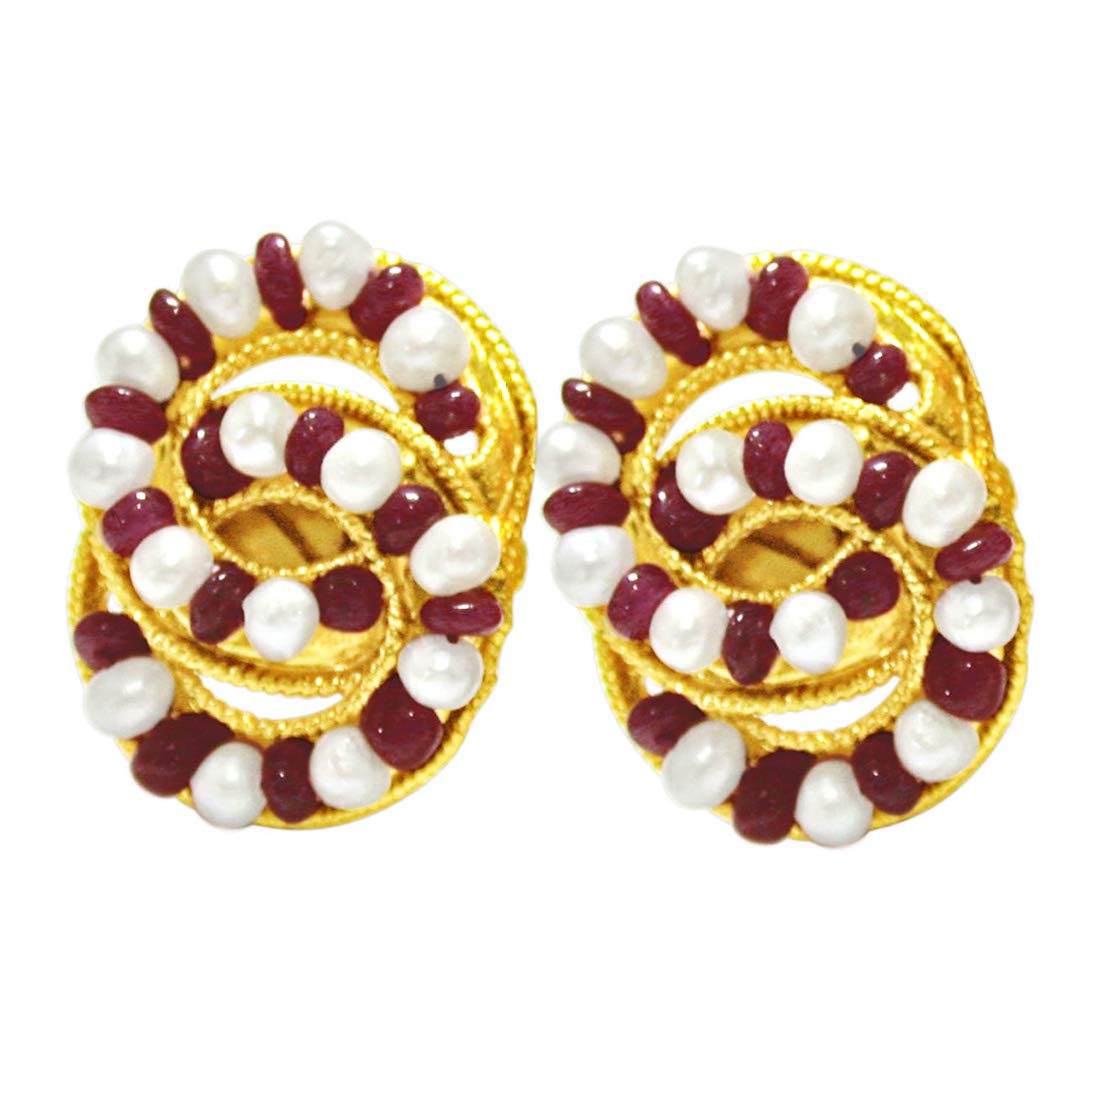 Stylish Sensation - Real Red Ruby Beads, Freshwater Pearls & Gold Plated Earrings for Women (SE77)